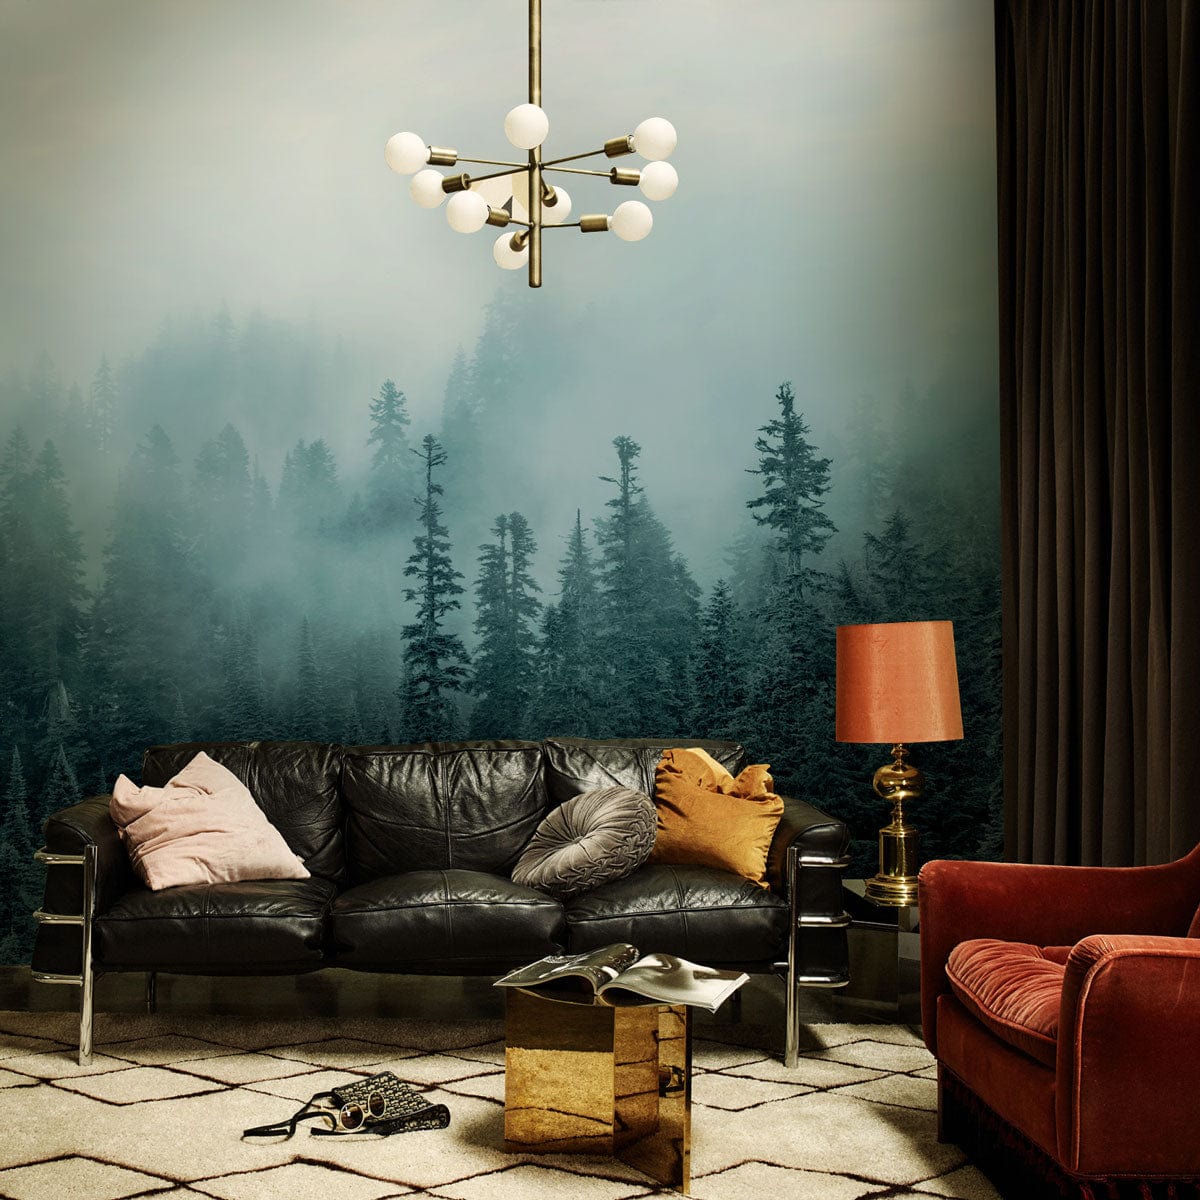 Wallpaper mural with a tranquil misty forest, perfect for decorating the living room.